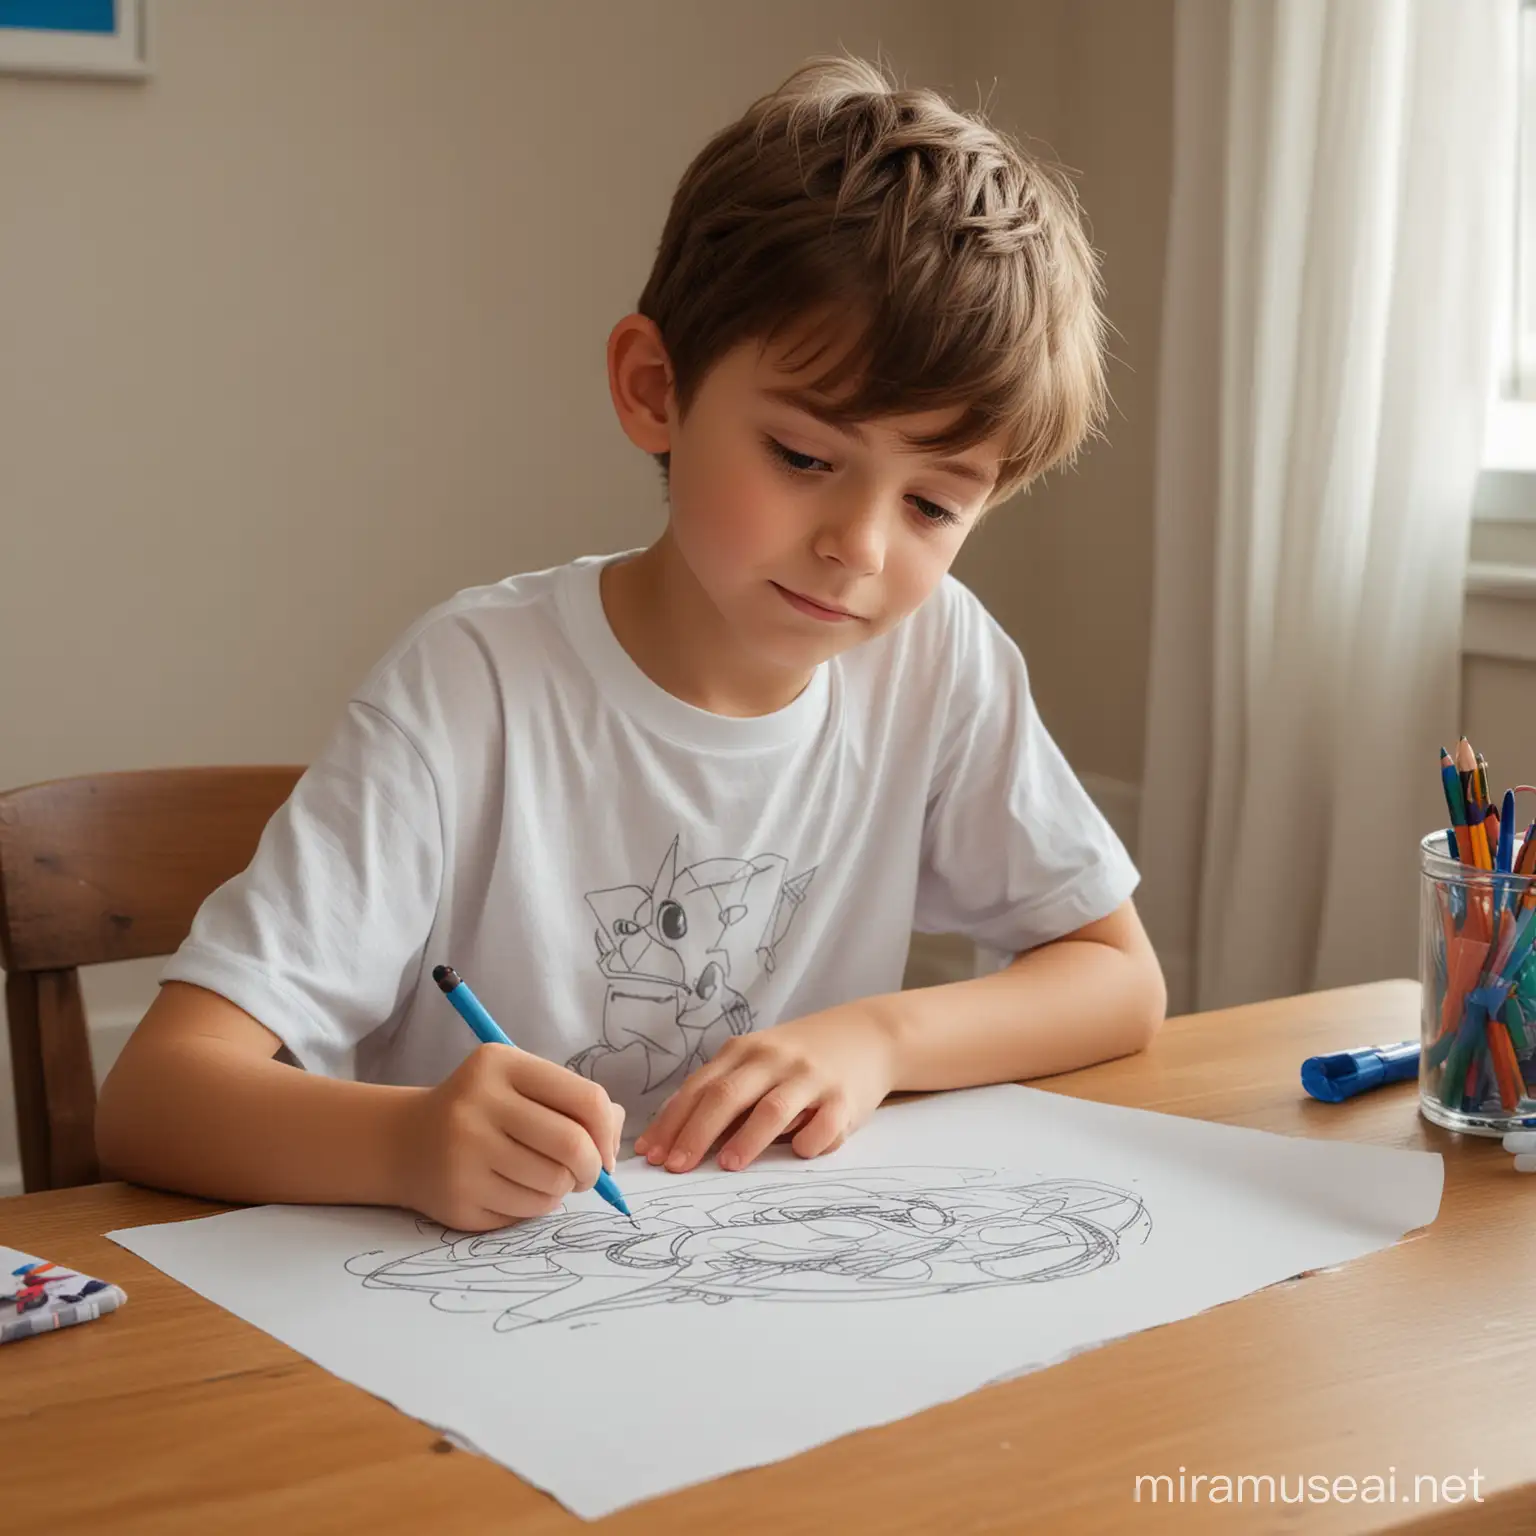 10-year-old boy draws on a piece of paper, children's drawing on paper, children's room, Disney Pixar style